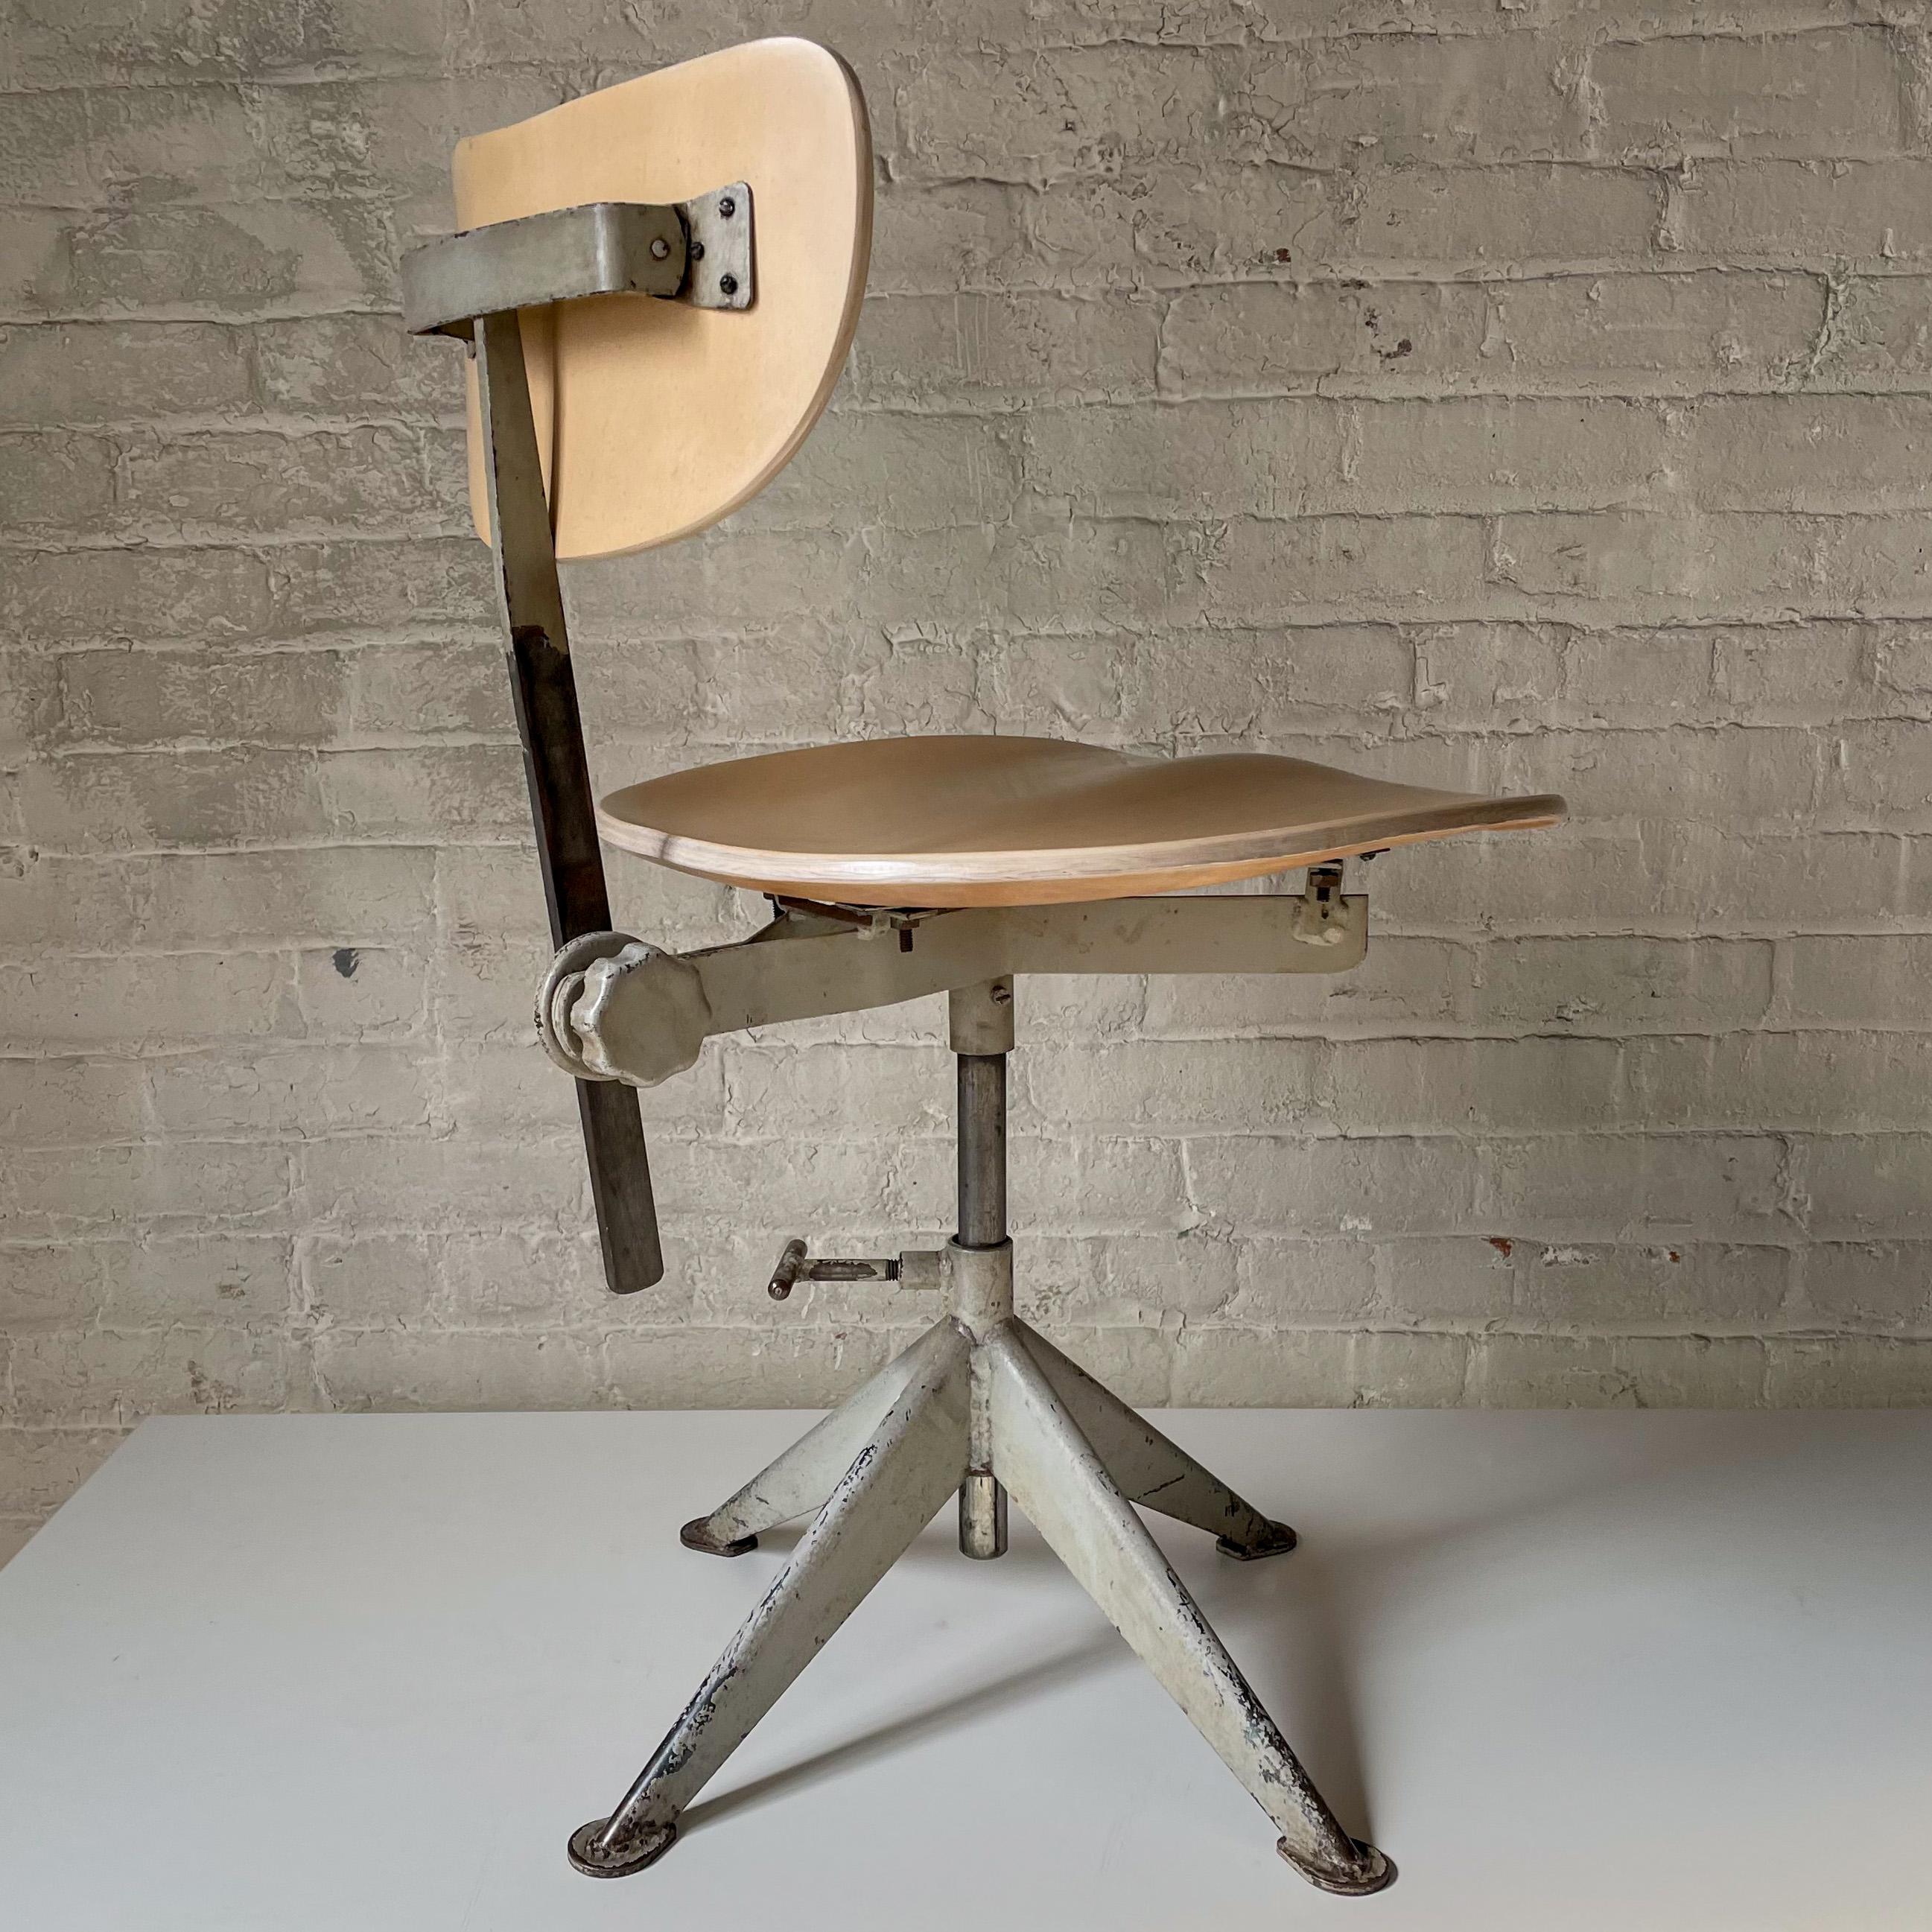 Work chair of molded birch plywood and painted steel by the Swedish metalworking firm of Odelberg Olsen, produced circa 1948, for distribution by Knoll in the U.S. market. The chair, which references Prouve, is shown in the 1948 Knoll catalog (image